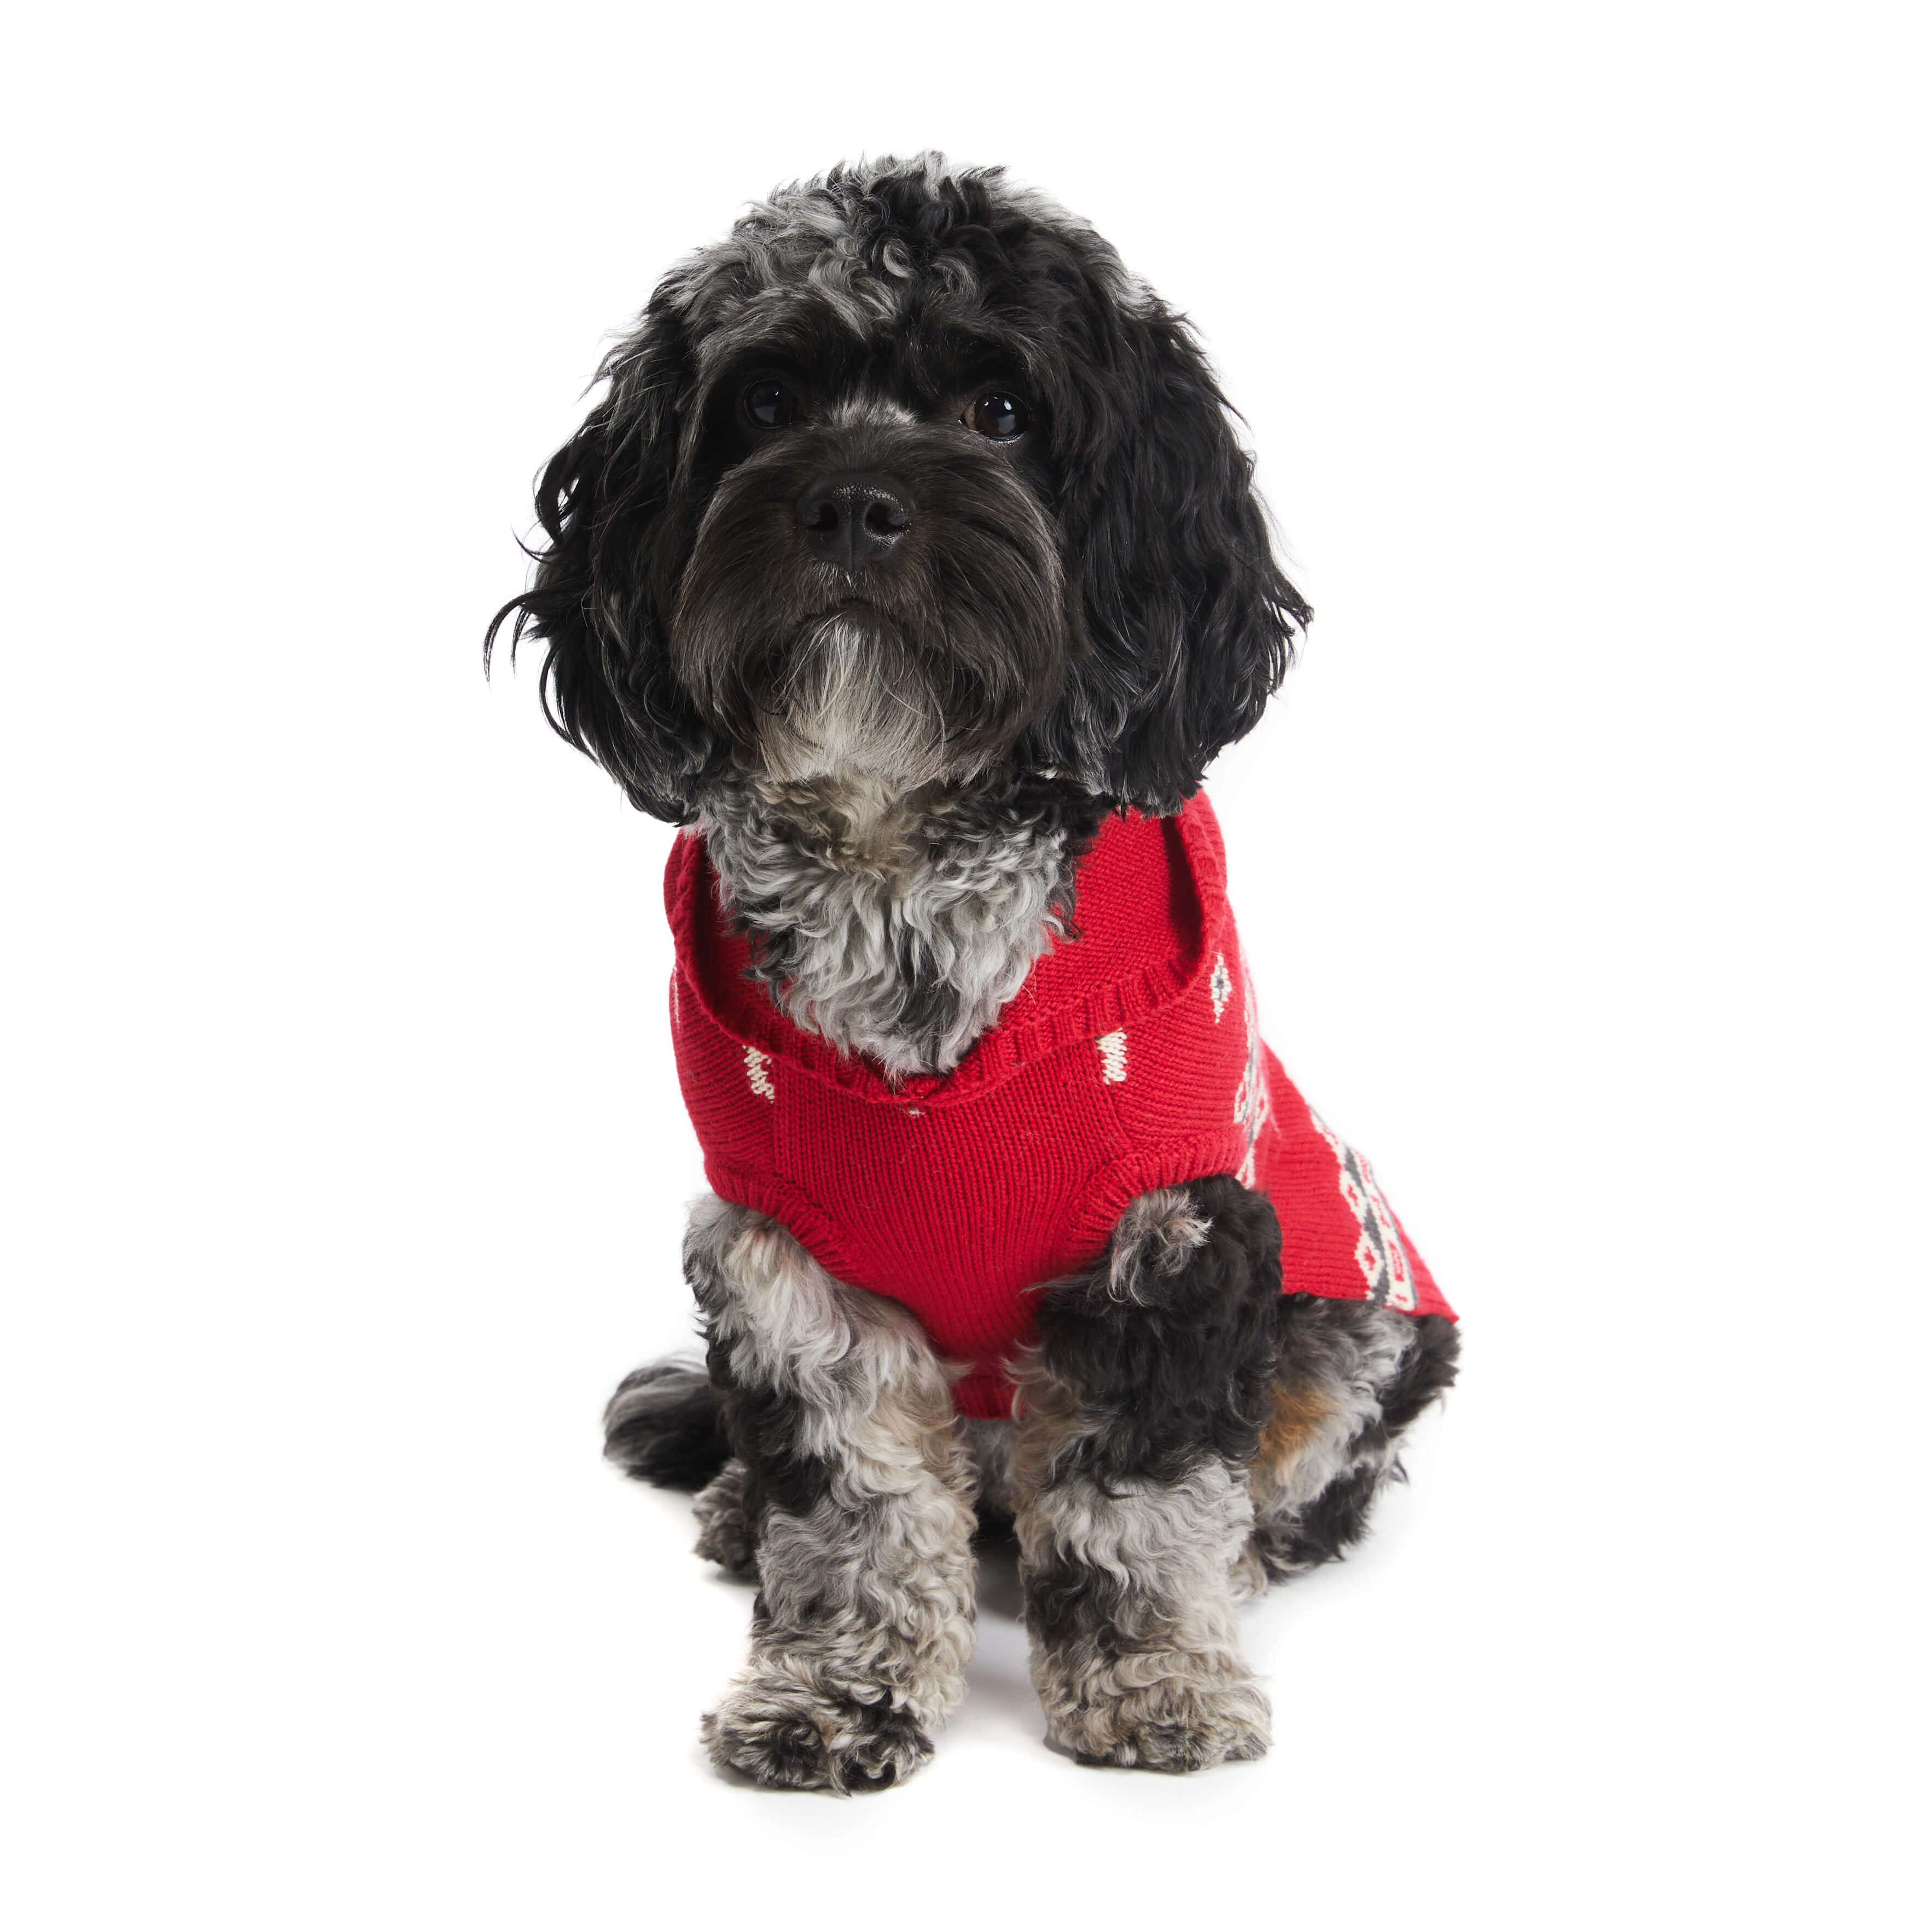 Dog wearing festive red sweater. Front view